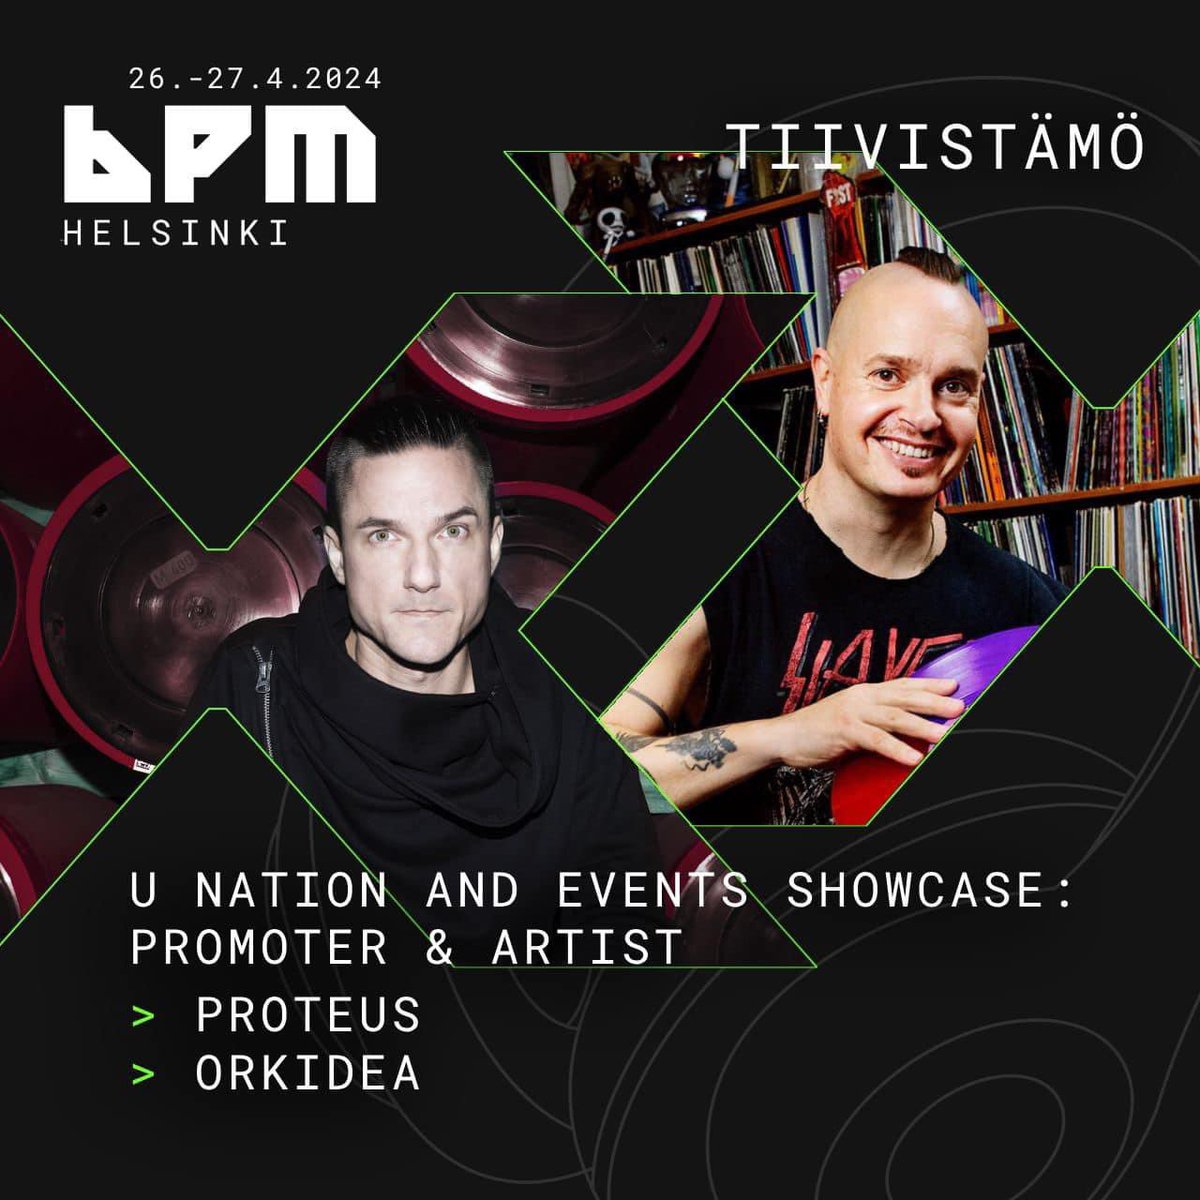 This Friday giving keynote talk with dear friend and ultimate promoter Harri-Proteus at the BPM Helsinki event filled with inspiring content around DJ culture and event industry. Come and join the community 🫶🏻